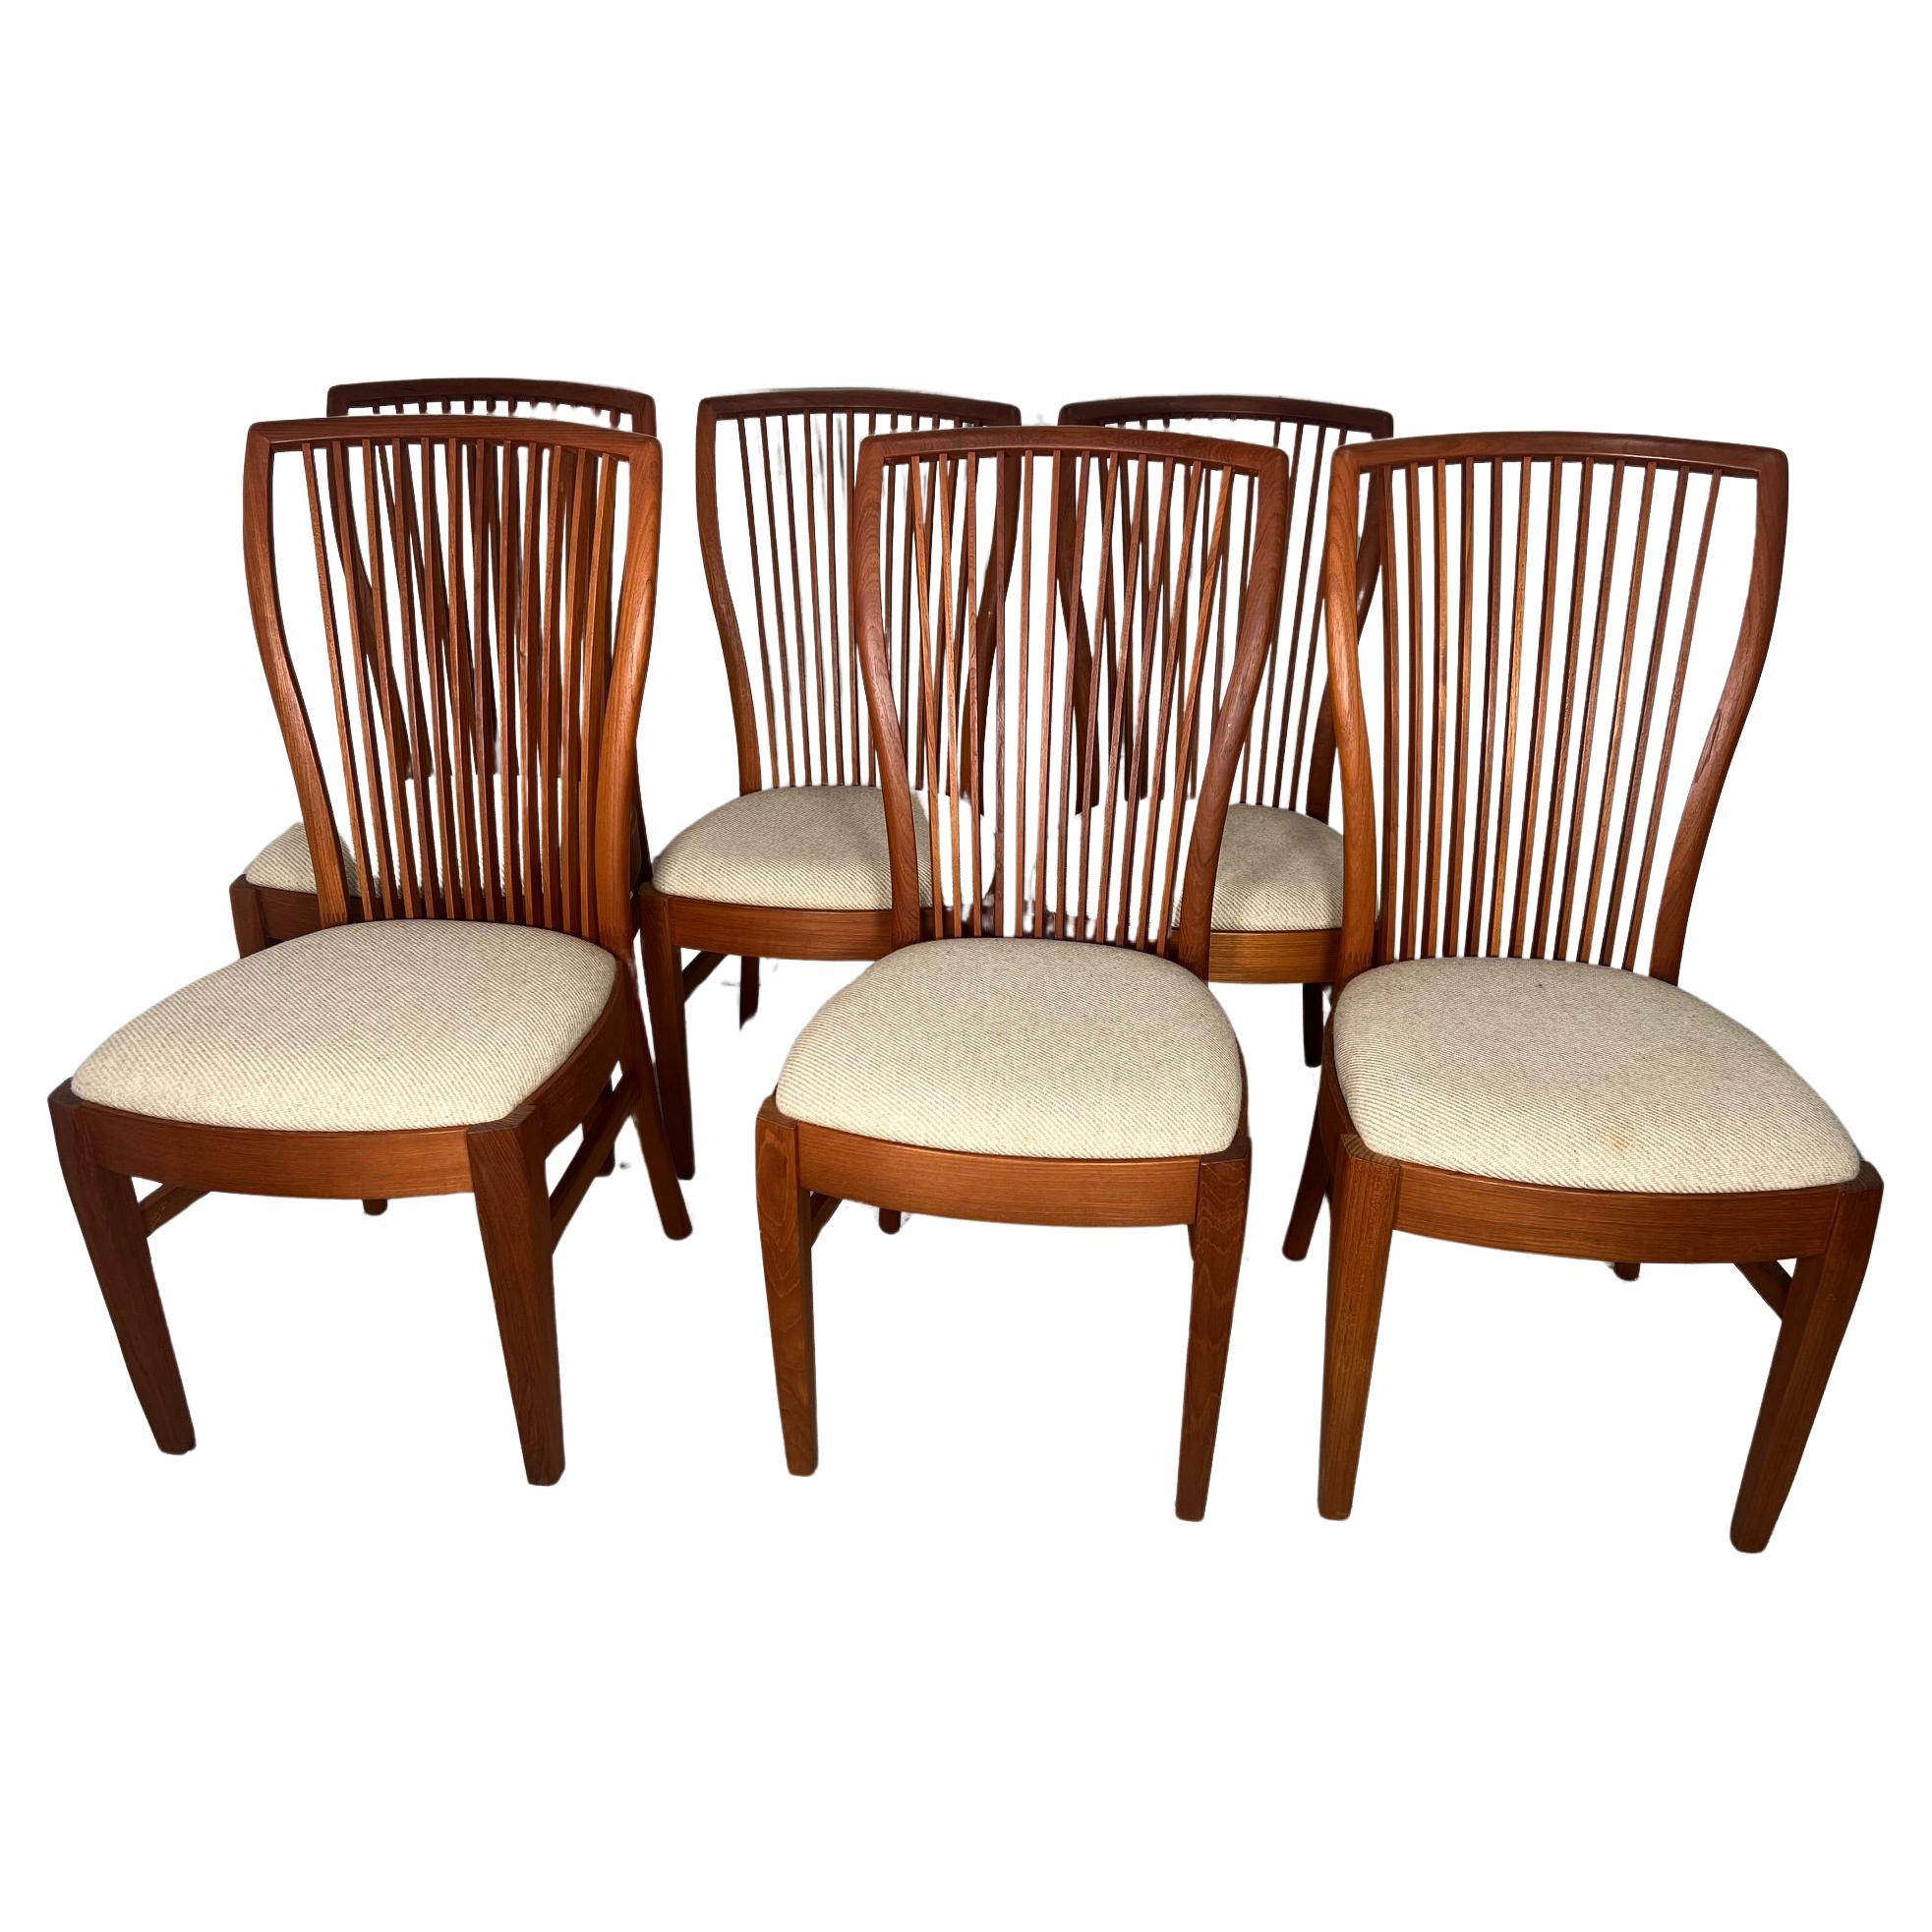 Set Of 6 Mid Century Modern Teak Dining Chairs By Sun Cabinet For Sale